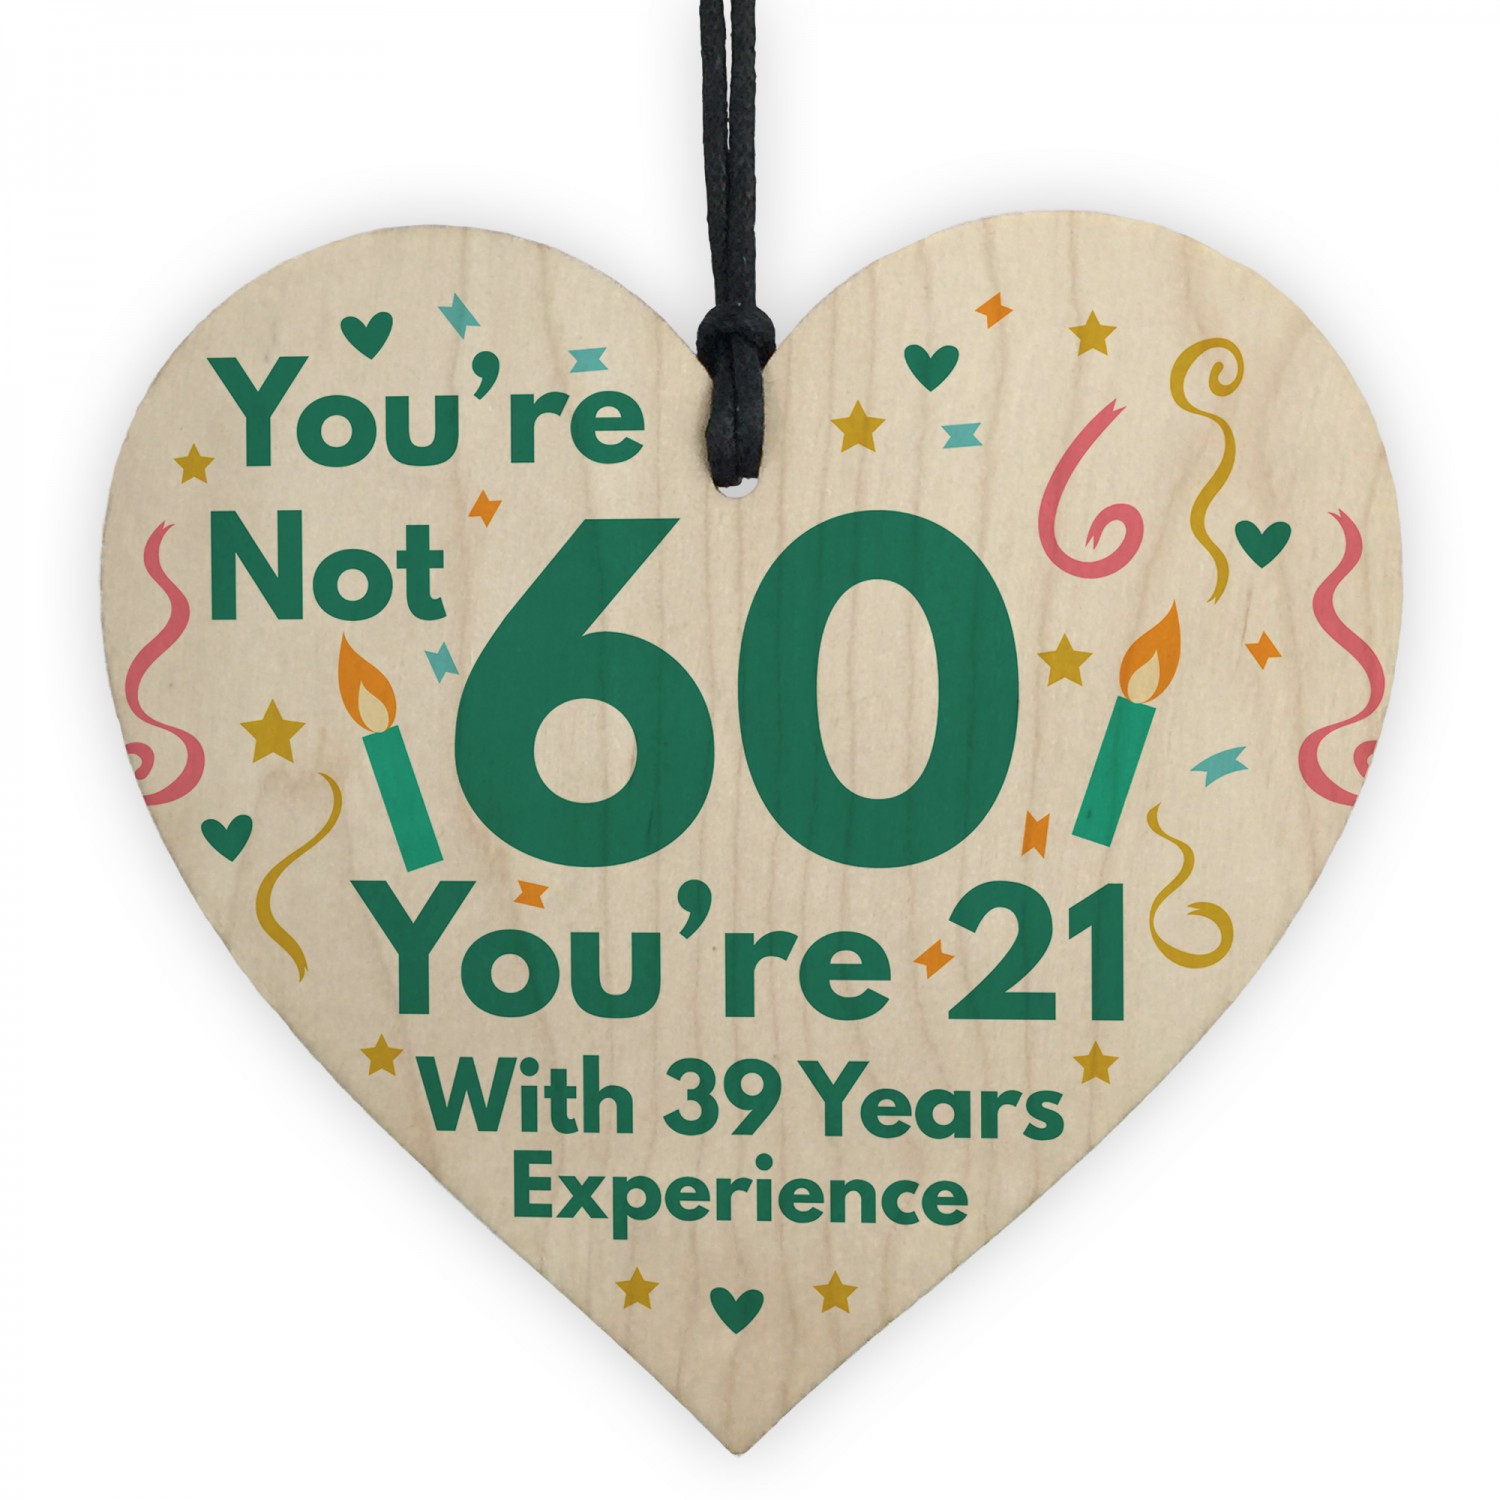 Funny 60th Birthday Gifts
 Funny Birthday Gifts Novelty 60th Birthday Gift Wood Heart